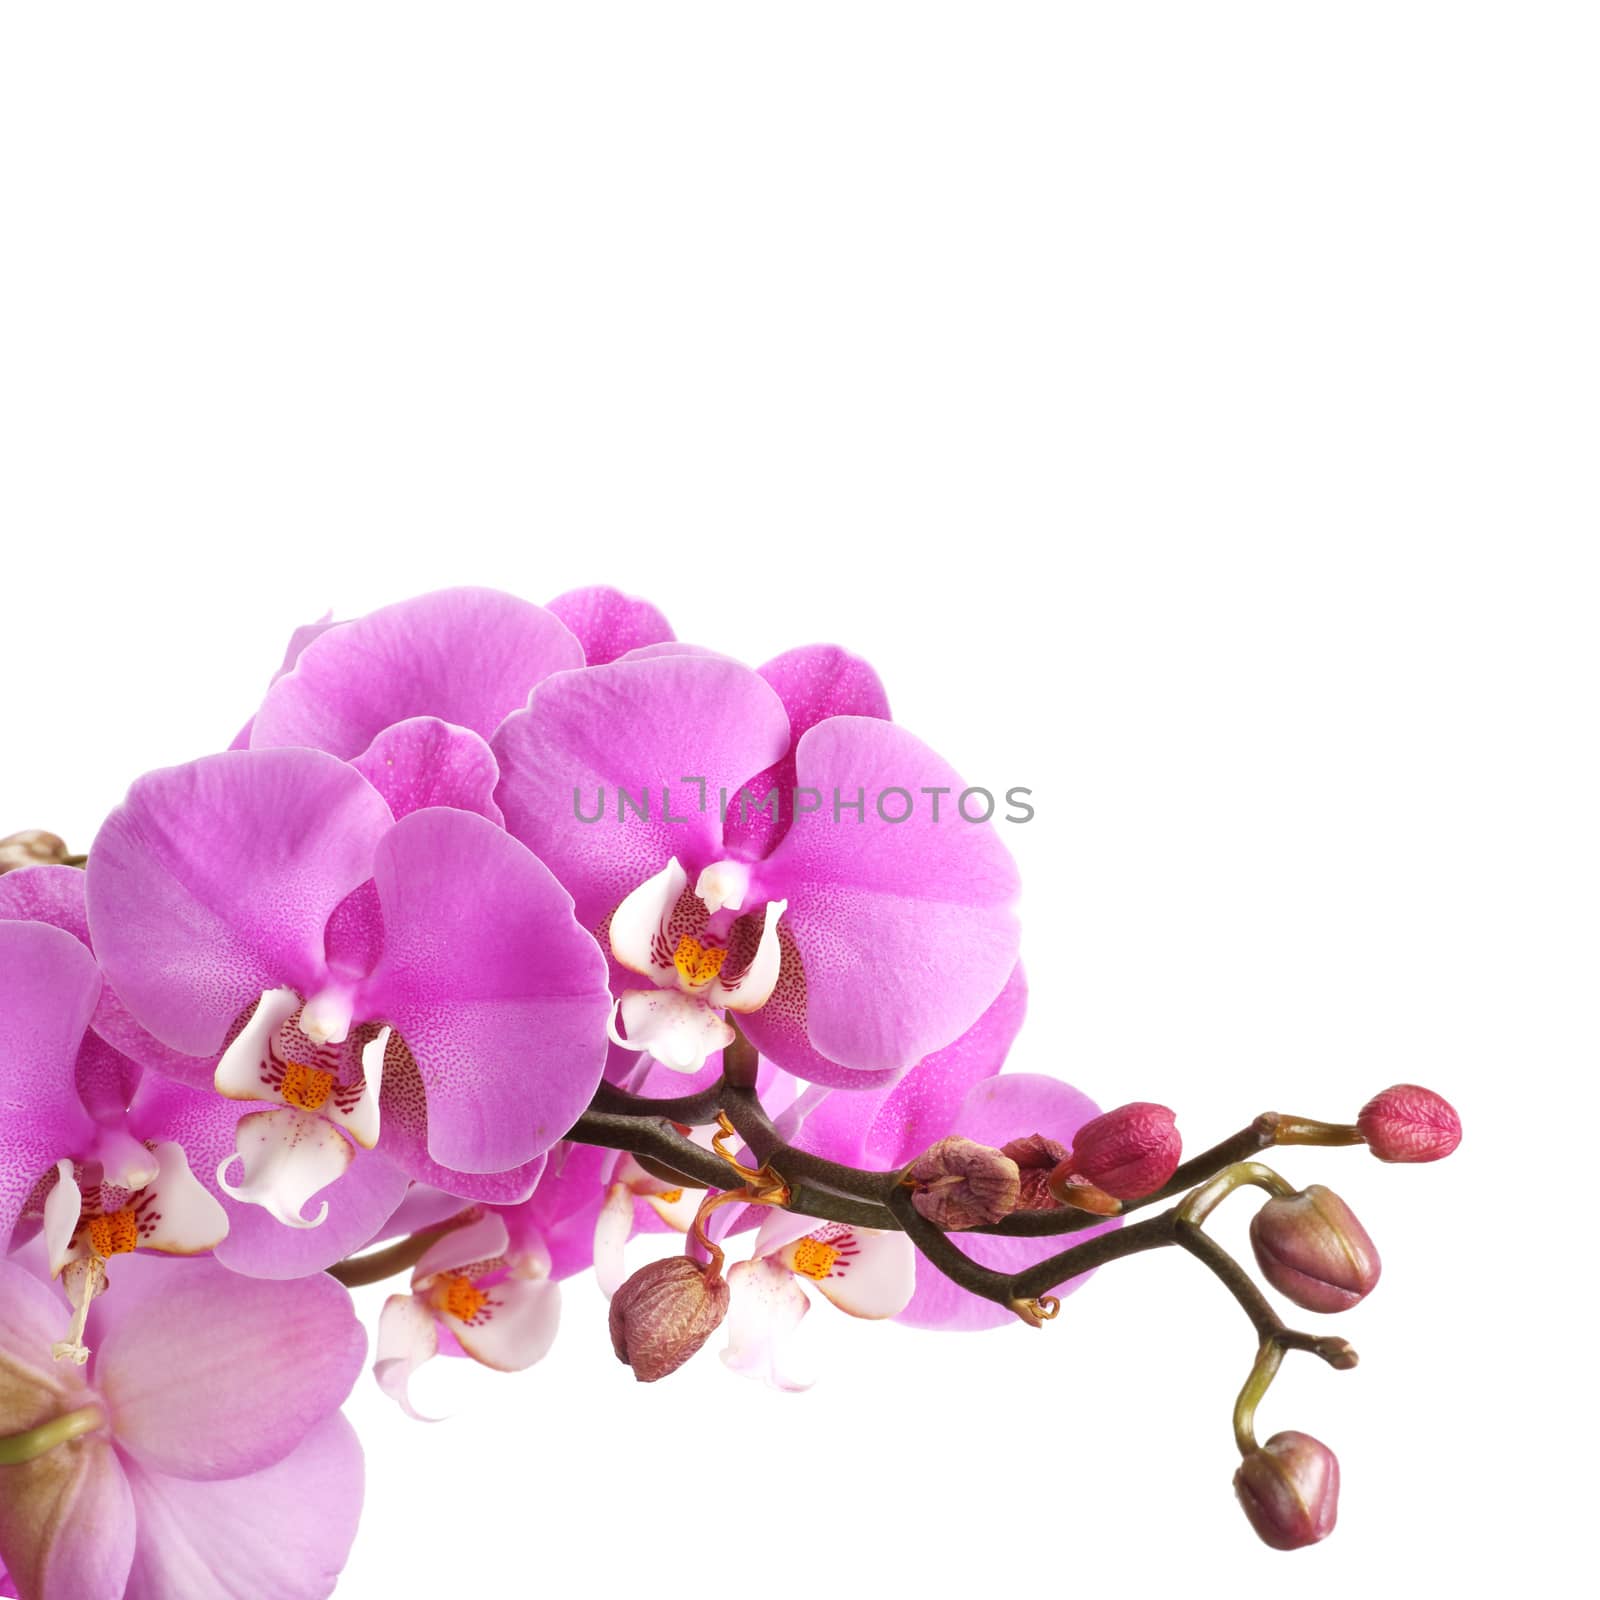 Pink streaked orchid flower isolated on white background